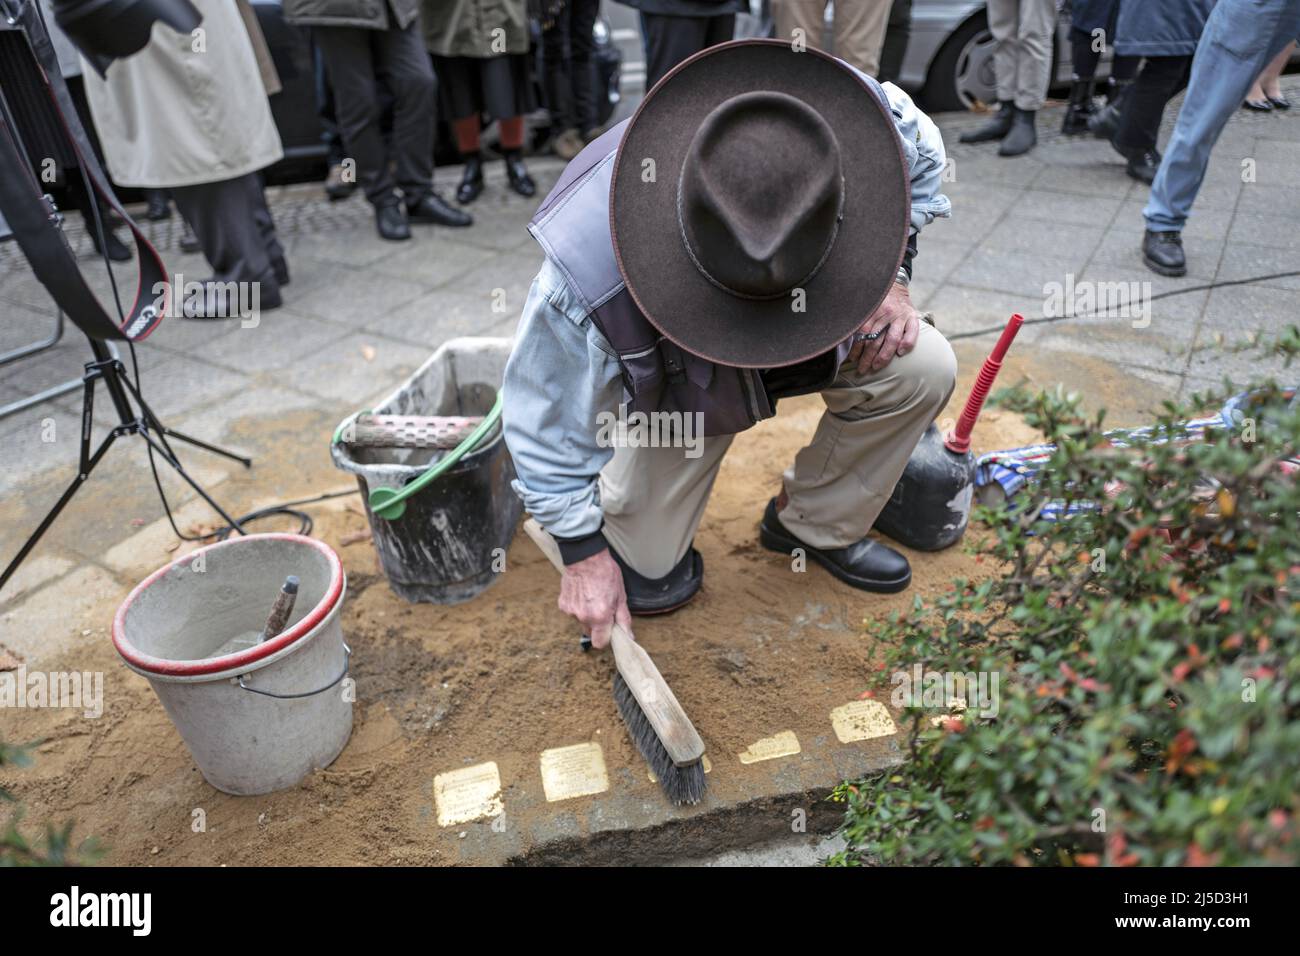 Germany, Berlin, 07.11.2021. Laying of stumbling stones for former members of the Foreign Office on 07.11.2021. Gunter Demnig, artist and initiator of the International Stumbling Stone Initiative. [automated translation] Stock Photo